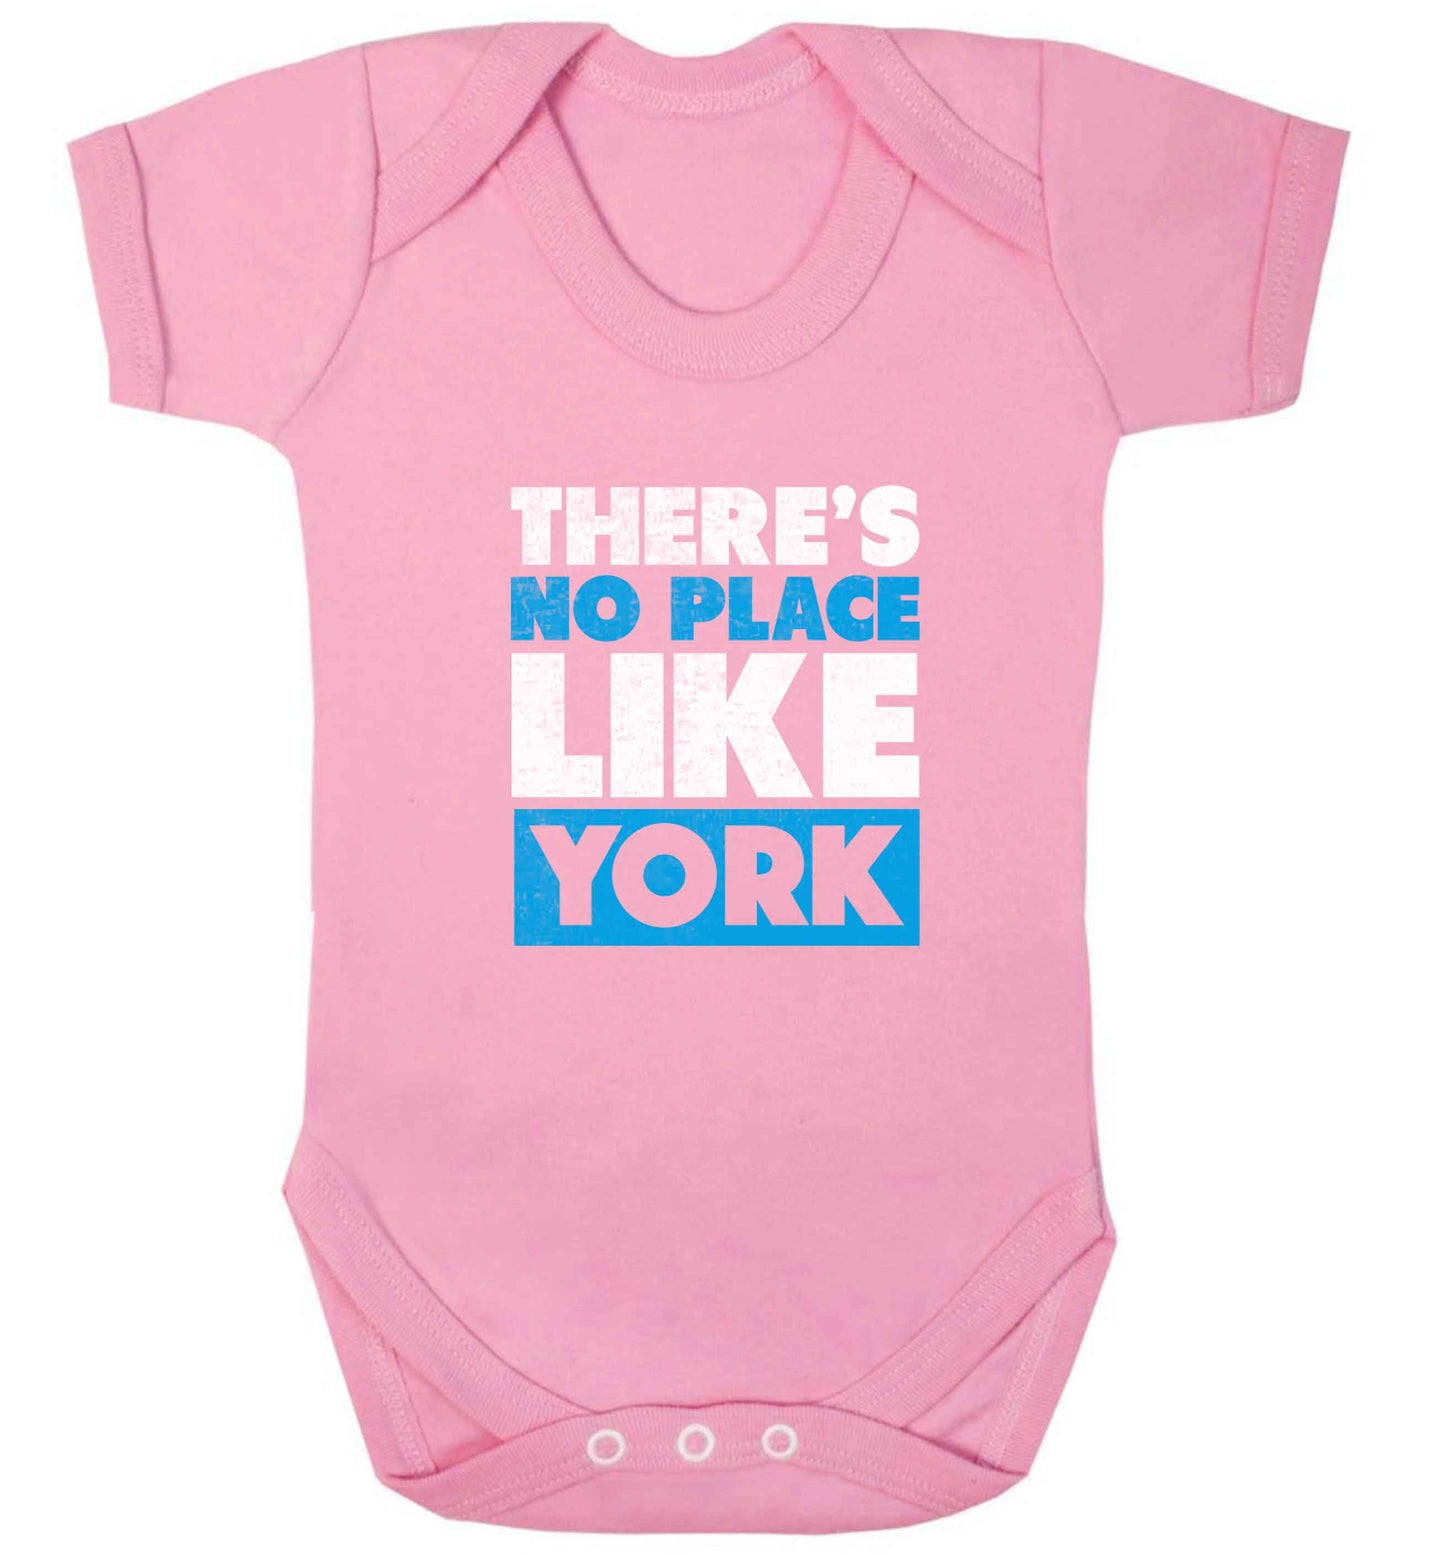 There's no place like york baby vest pale pink 18-24 months